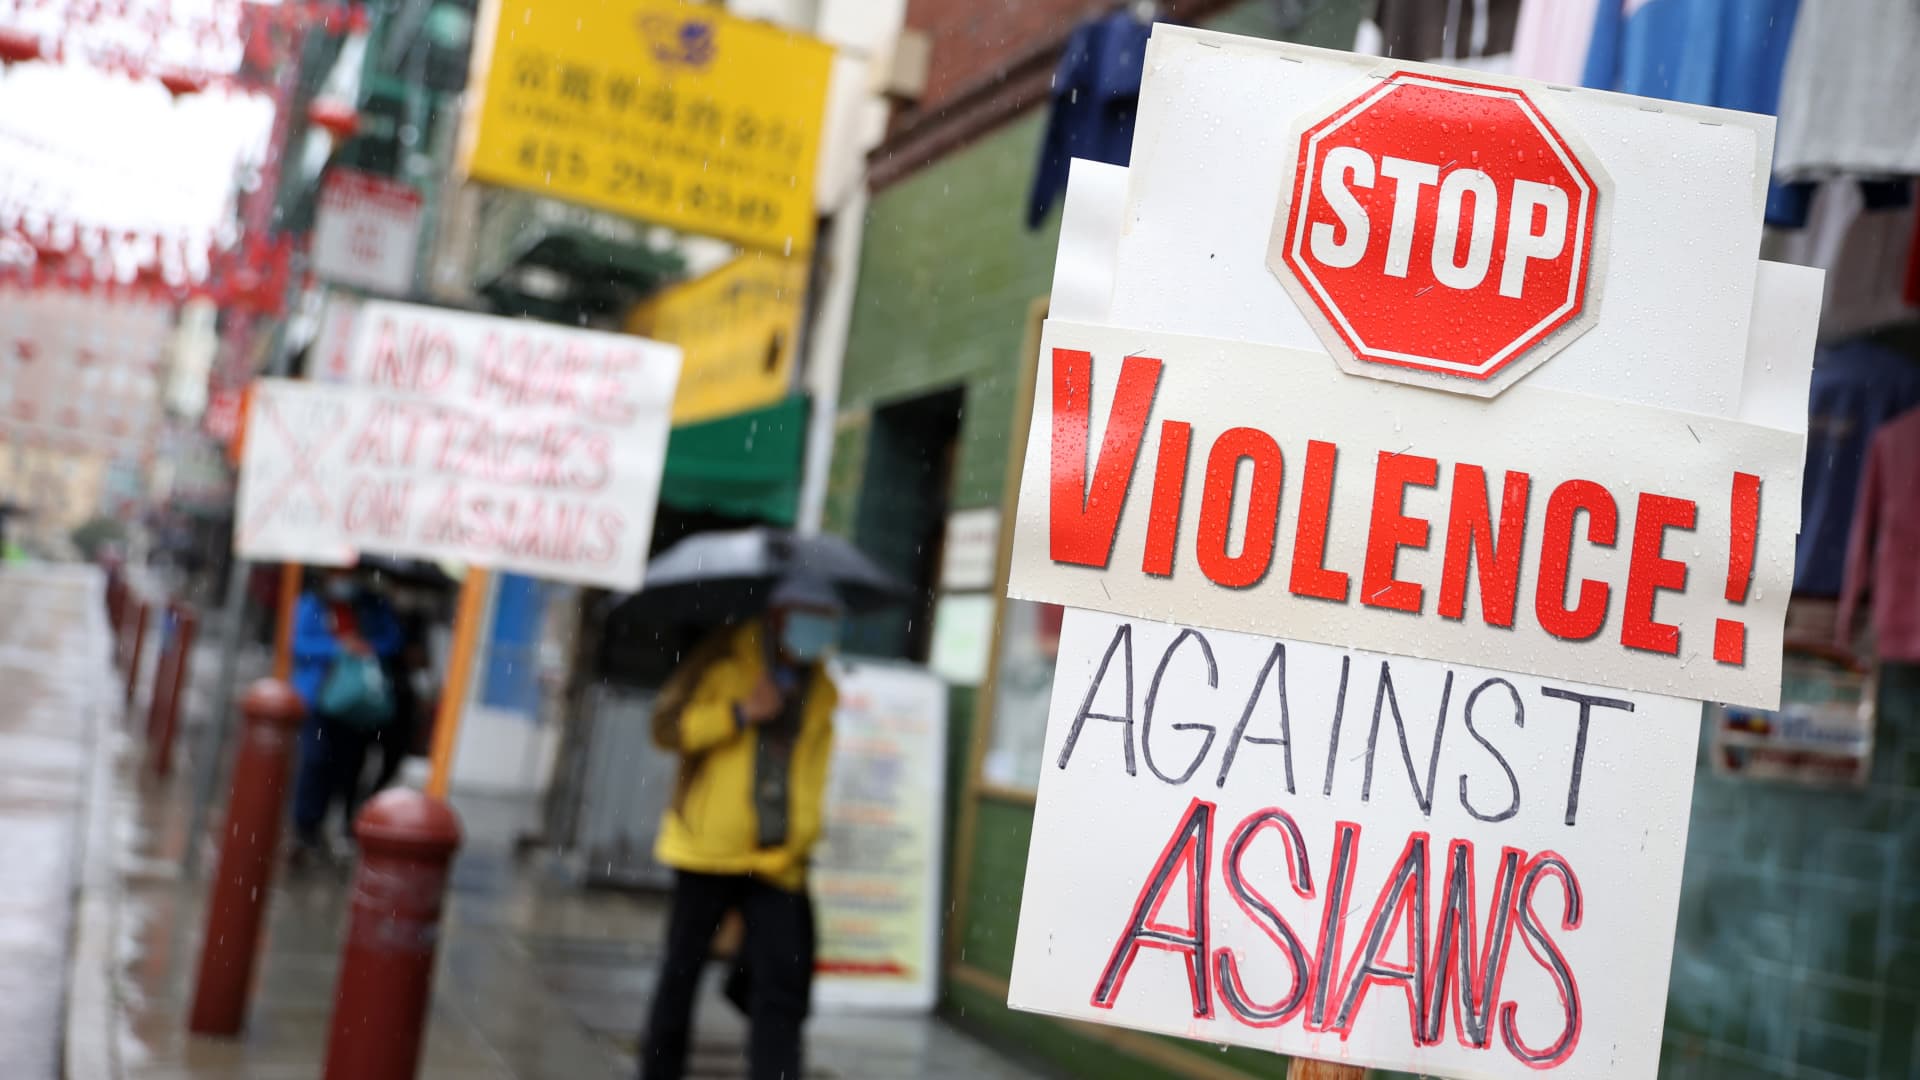 Signs against violence against Asians are posted in front of a store in Chinatown on March 18, 2021 in San Francisco, California.